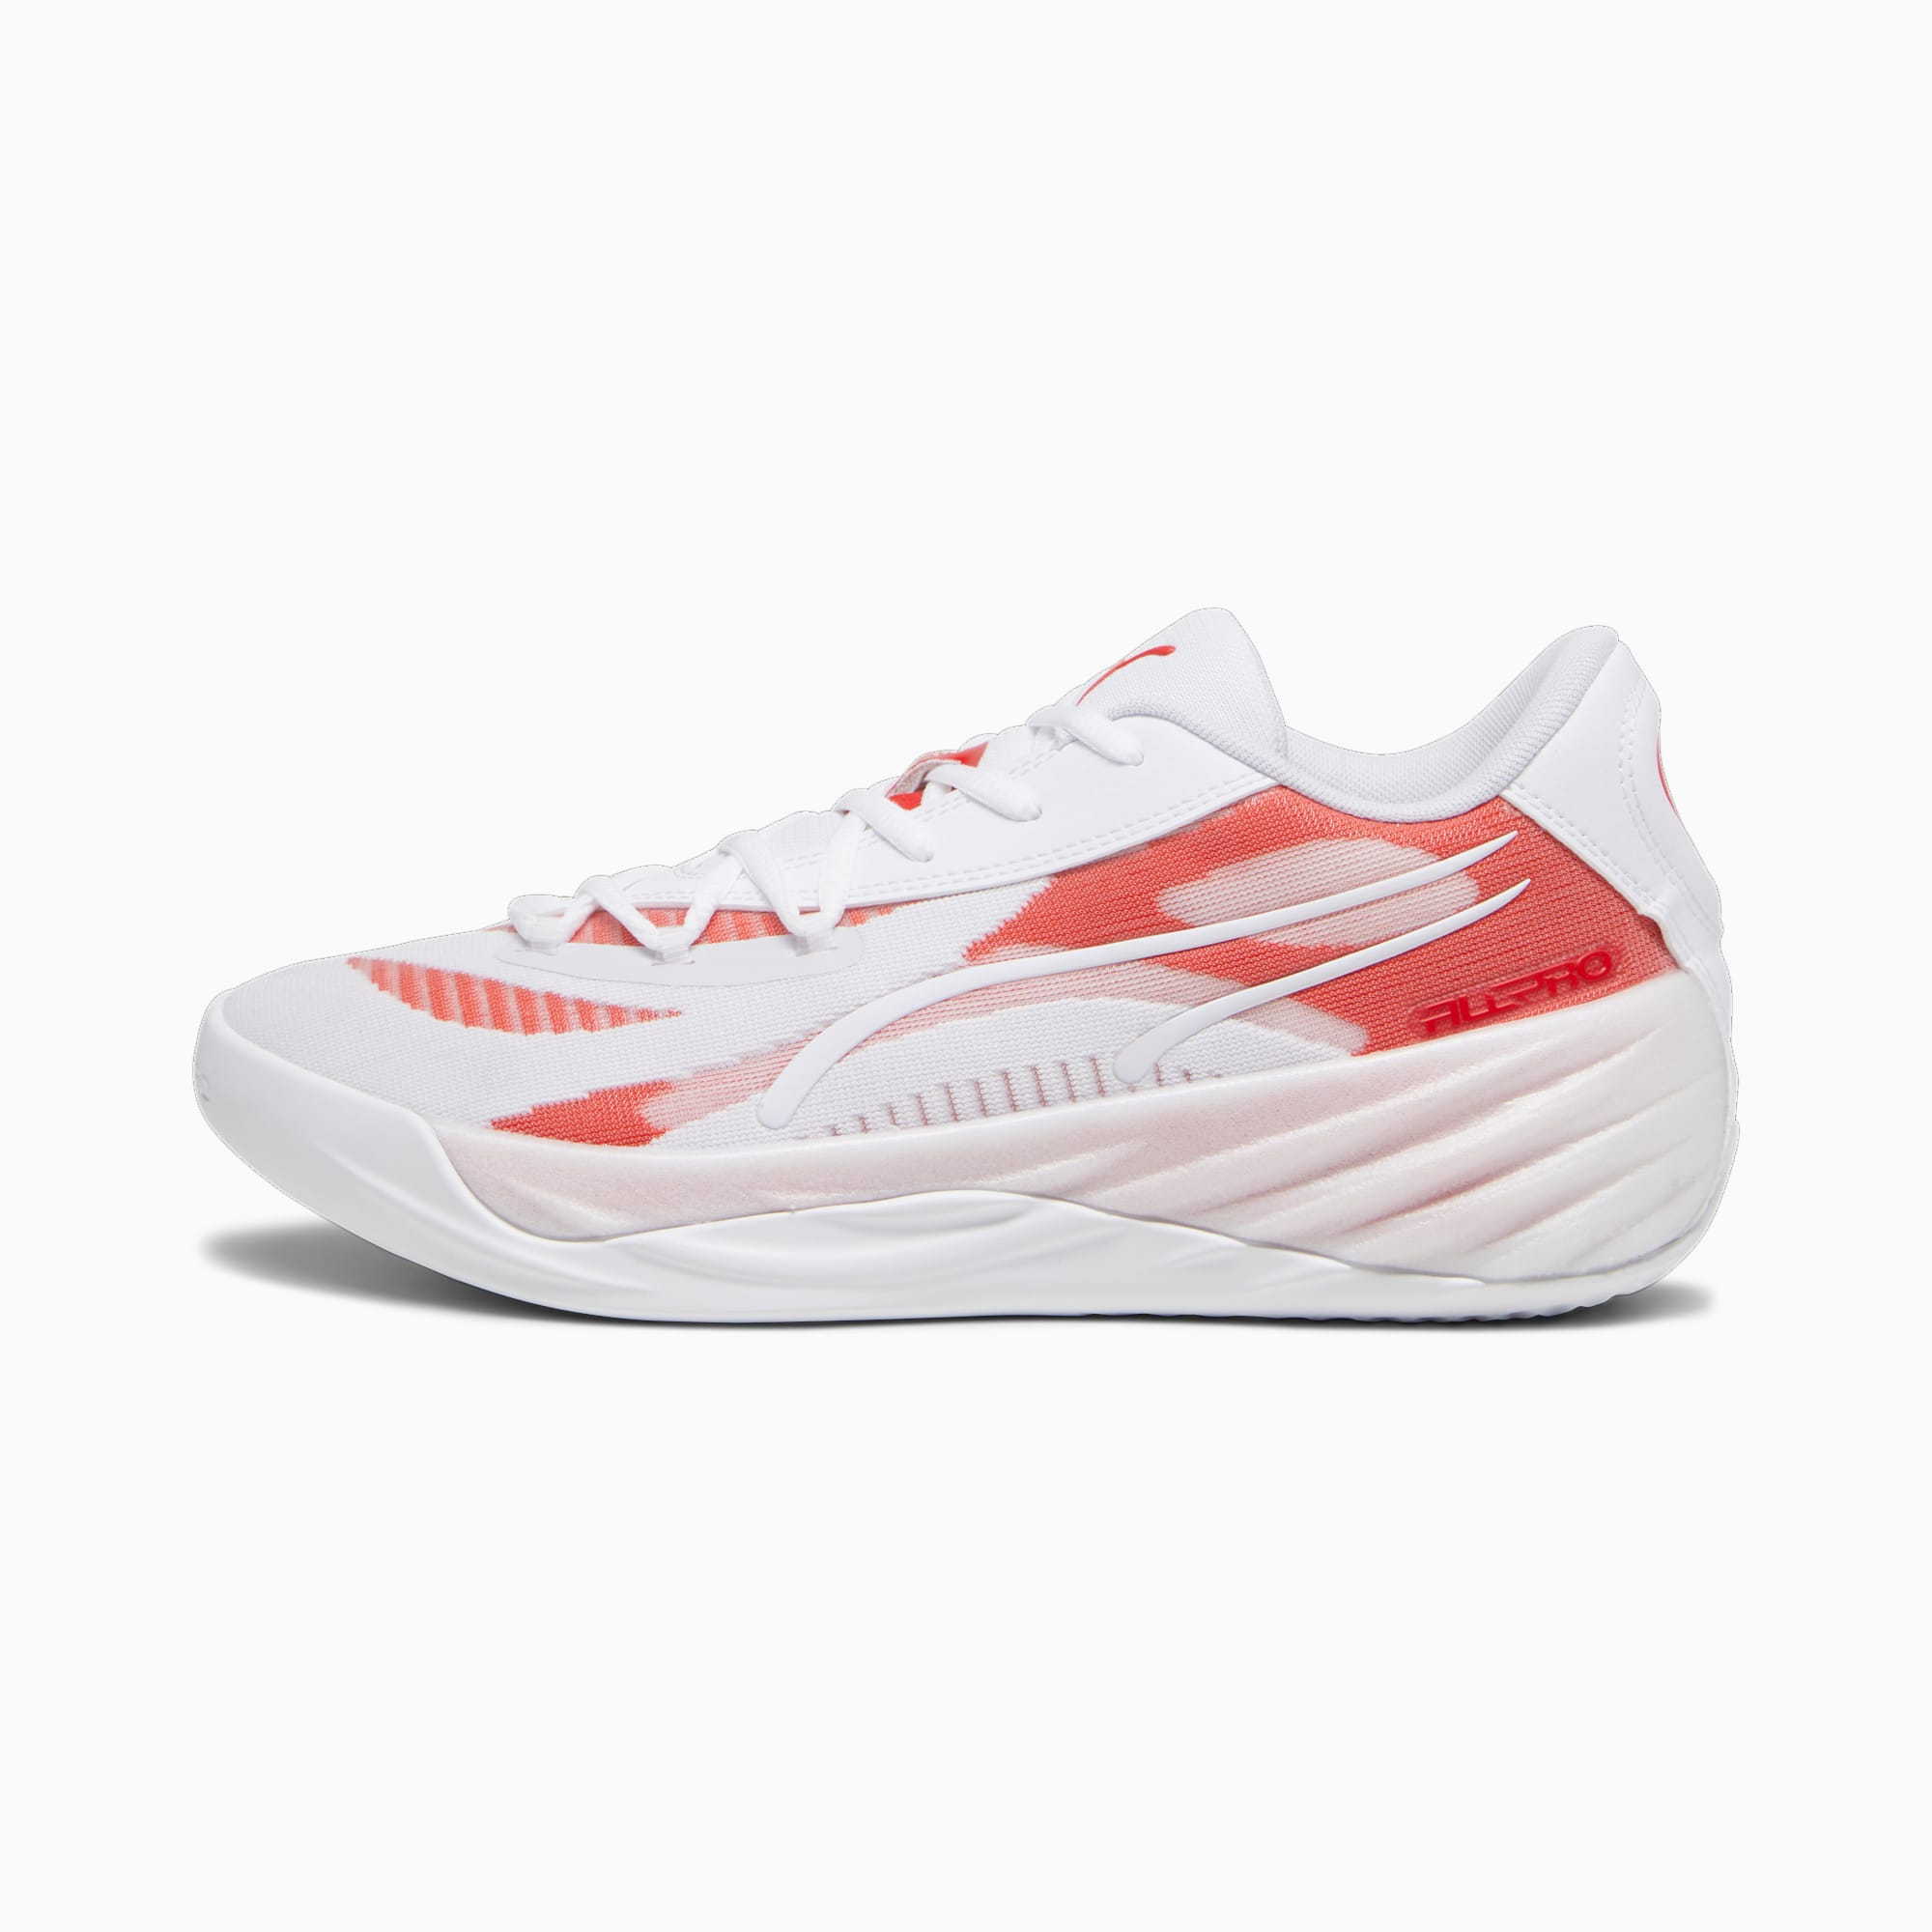 All-Pro NITRO Team Unisex Basketball Shoes | PUMA White-For All Time ...